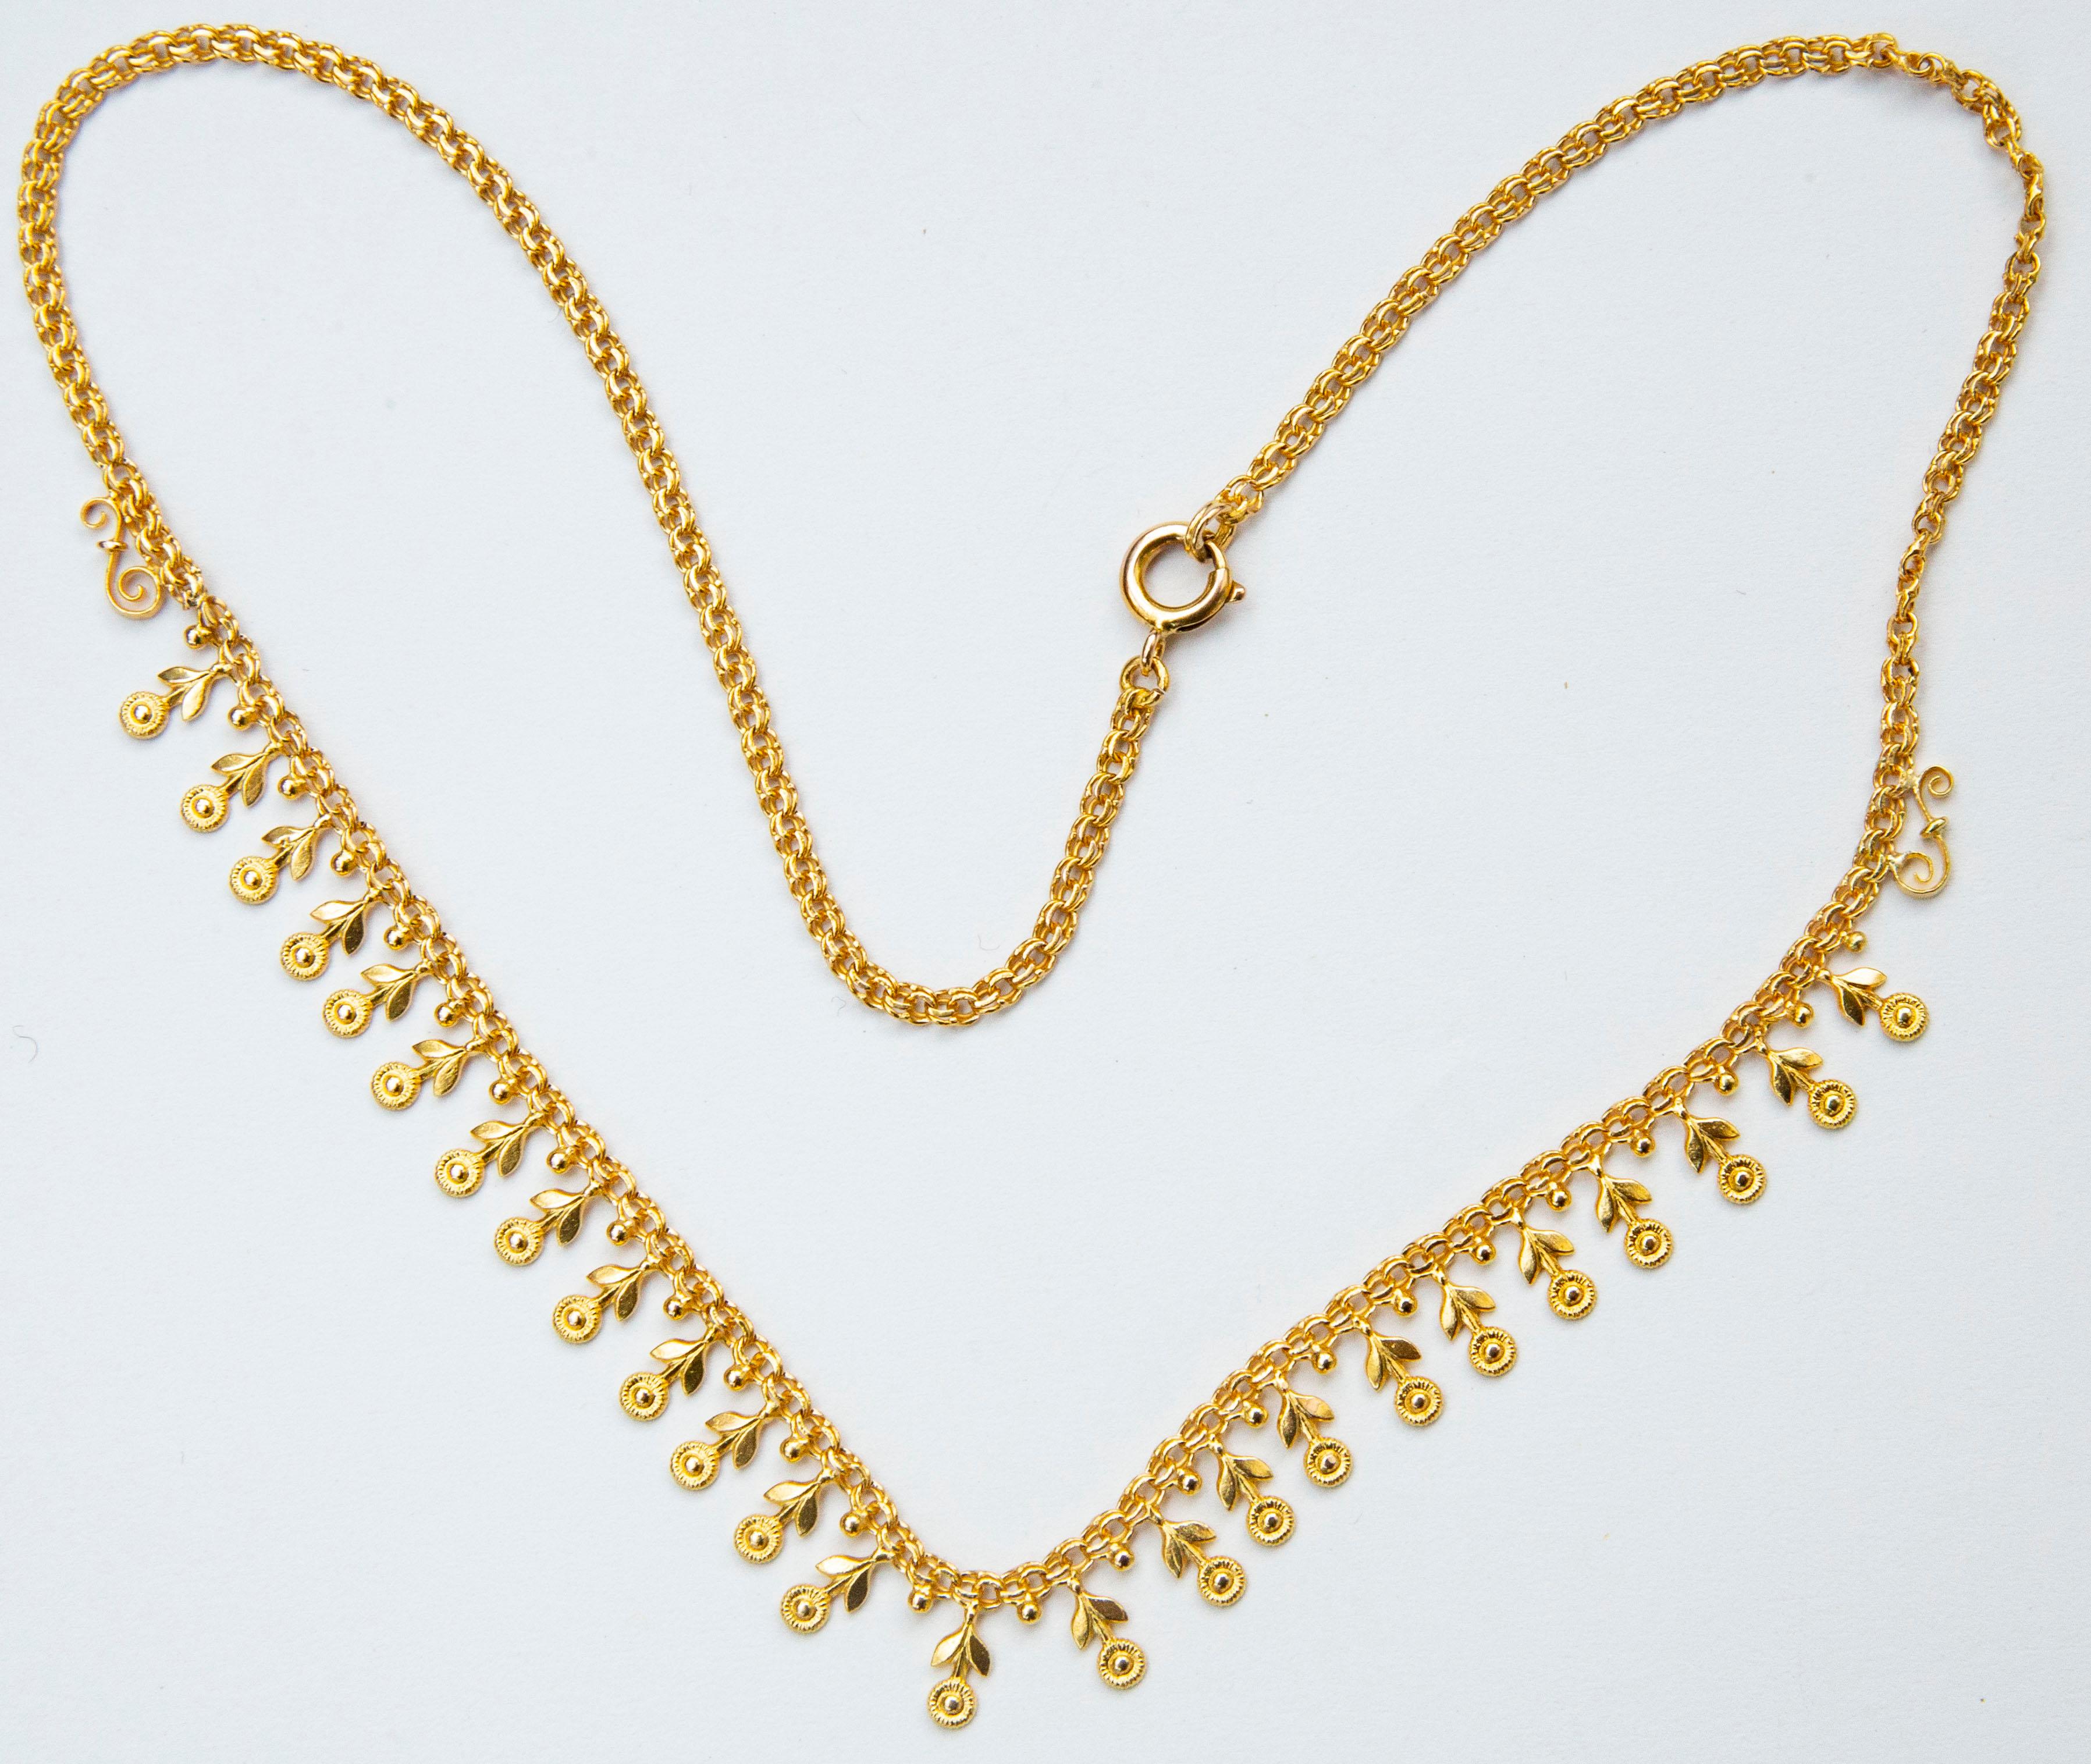 A vintage (1950s) 14 karat solid yellow gold choker necklace decorated with flower and ball - shaped charms. The necklace features a double rope chain that closes with a spring ring clasp. The necklace has a very cheerful appearance and would be a